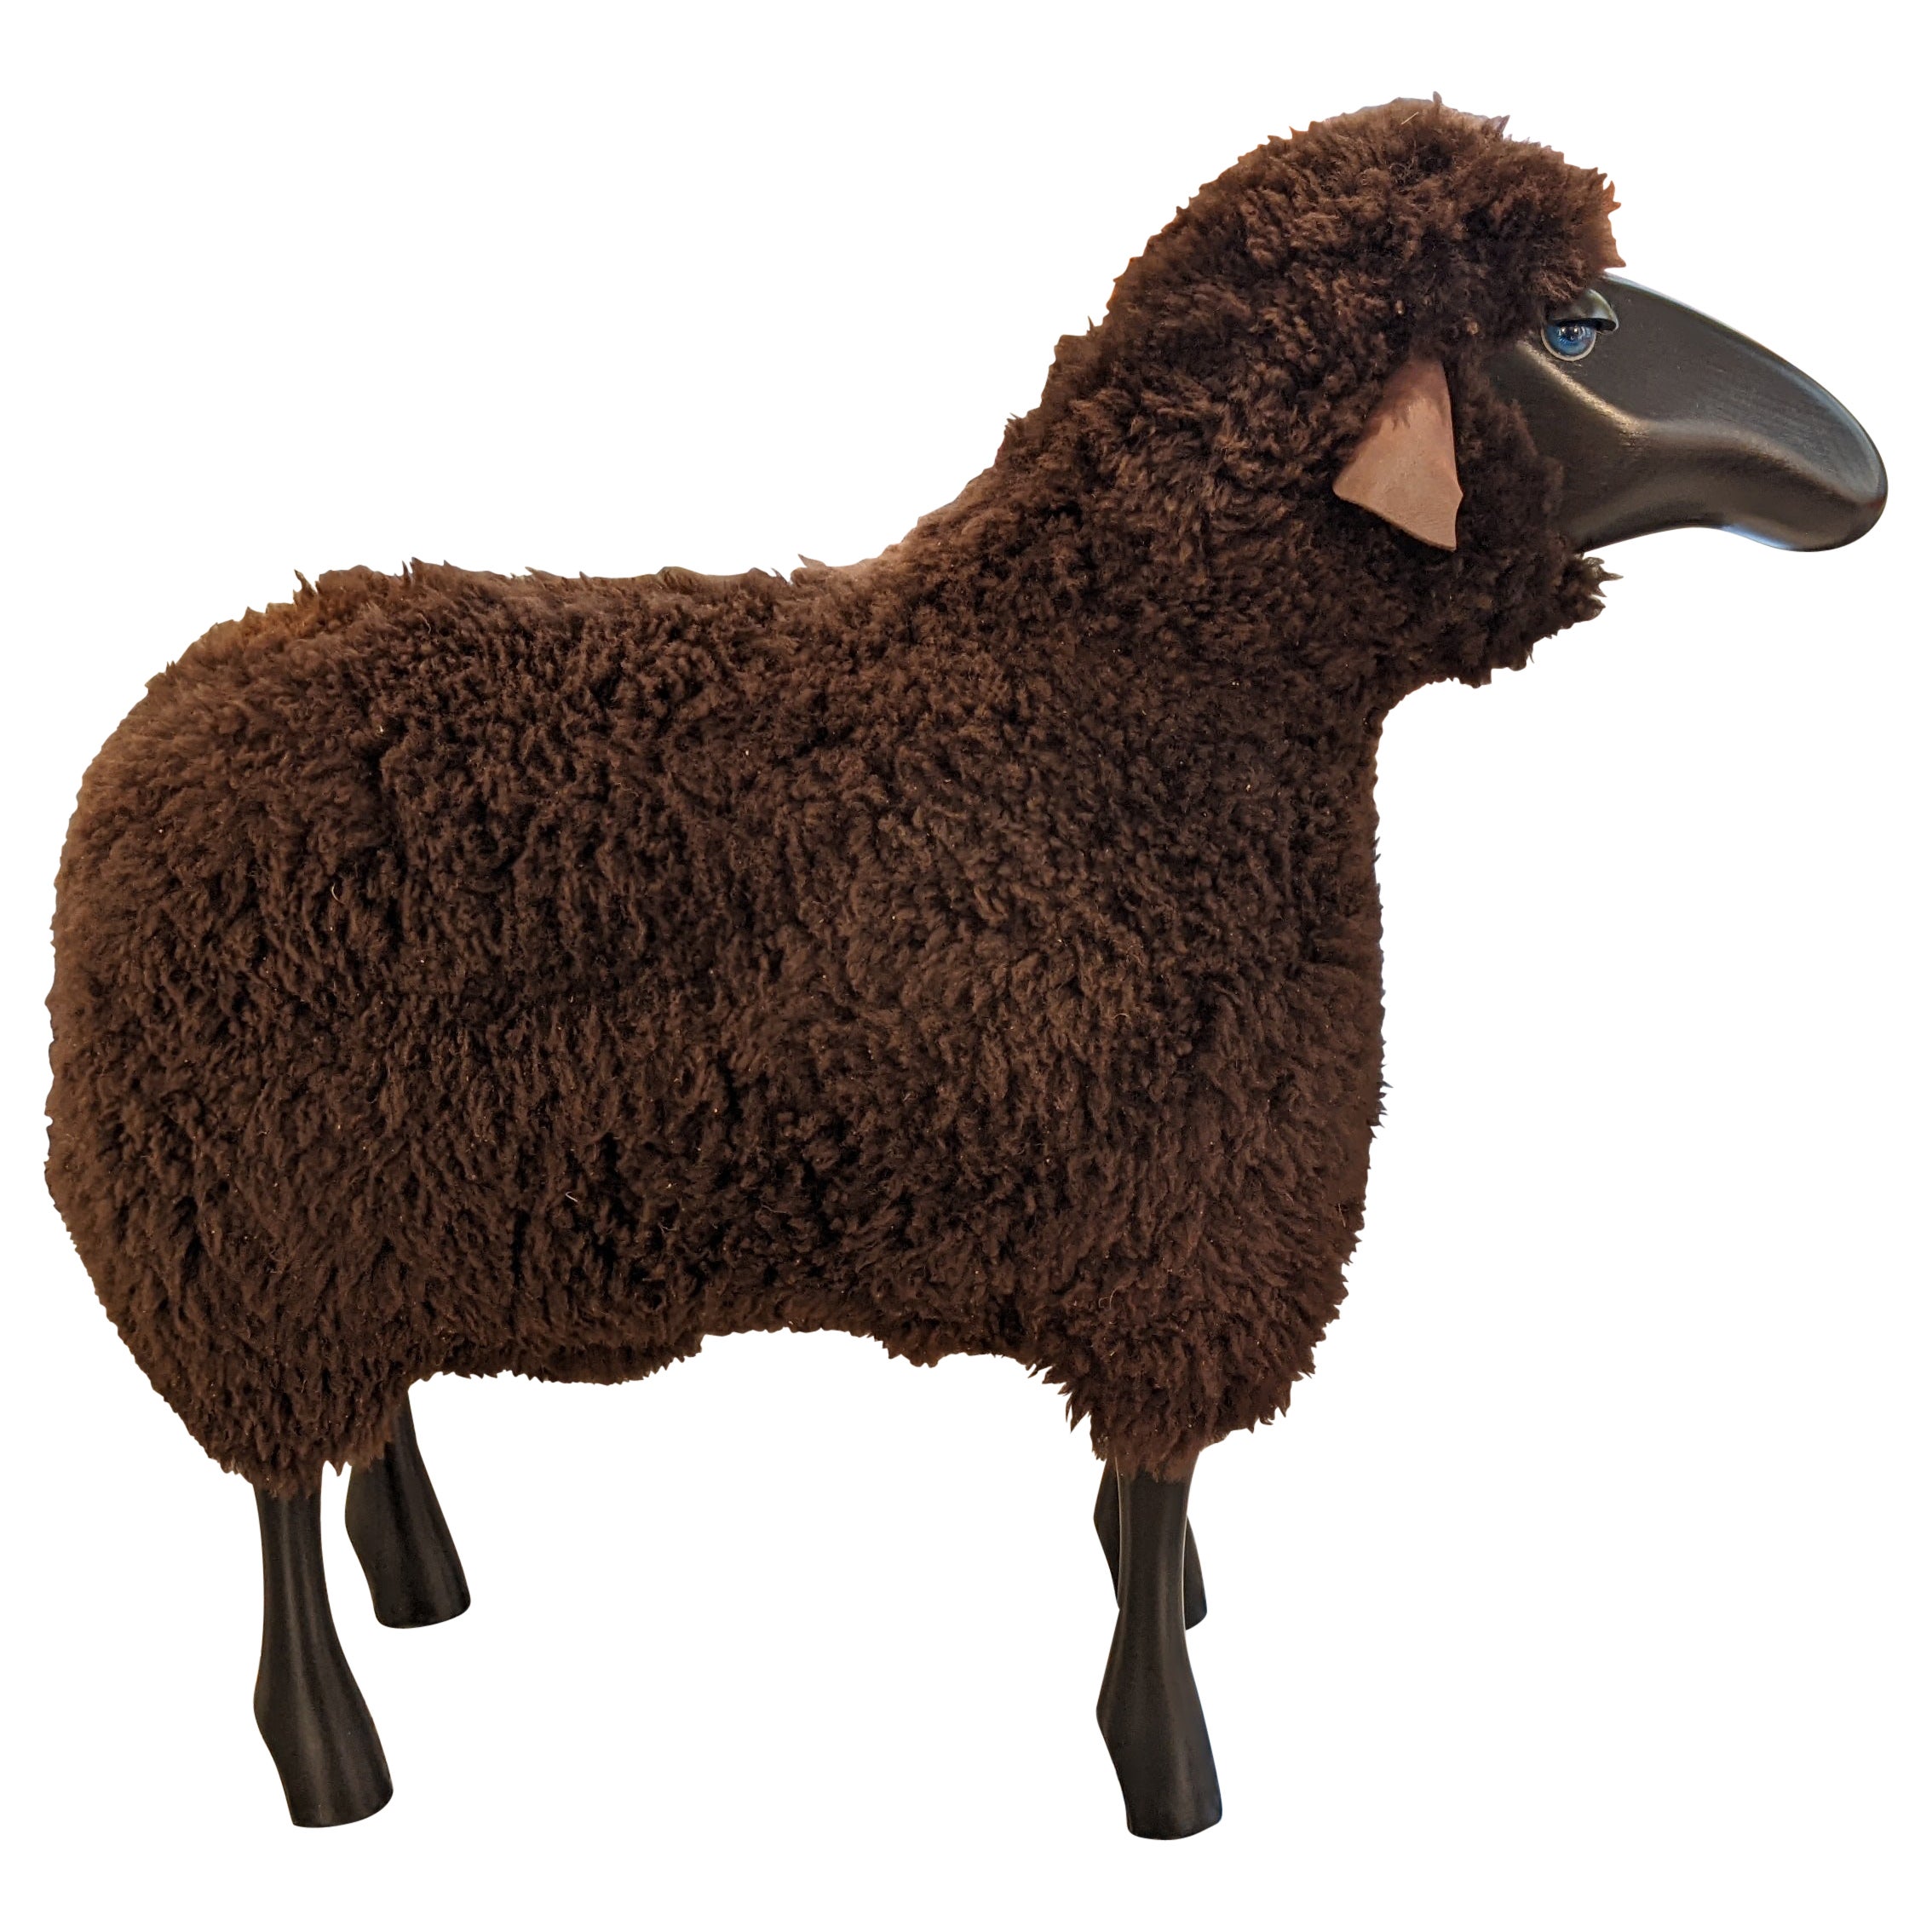 2 x 3 x 2cm Free Standing Novelty Black Glass Sheep Collectible Langs 